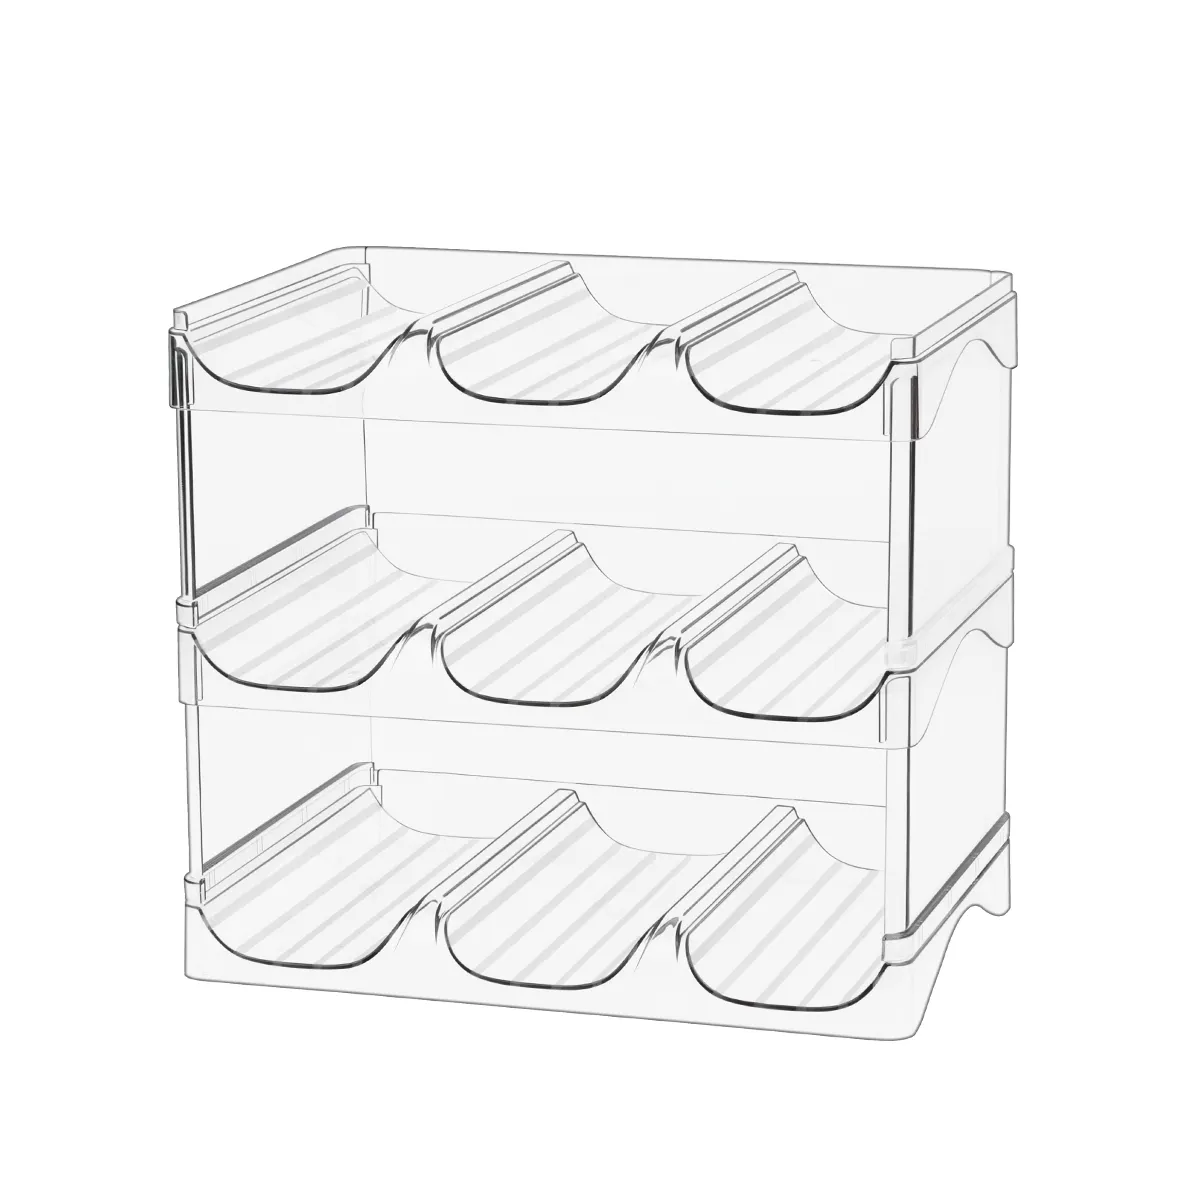 Water Bottle Organizer For Cabinet 4 Pack Plastic Clear Stackable Bottle Holder Storage Pantry Organizer and Cabinet Organizer